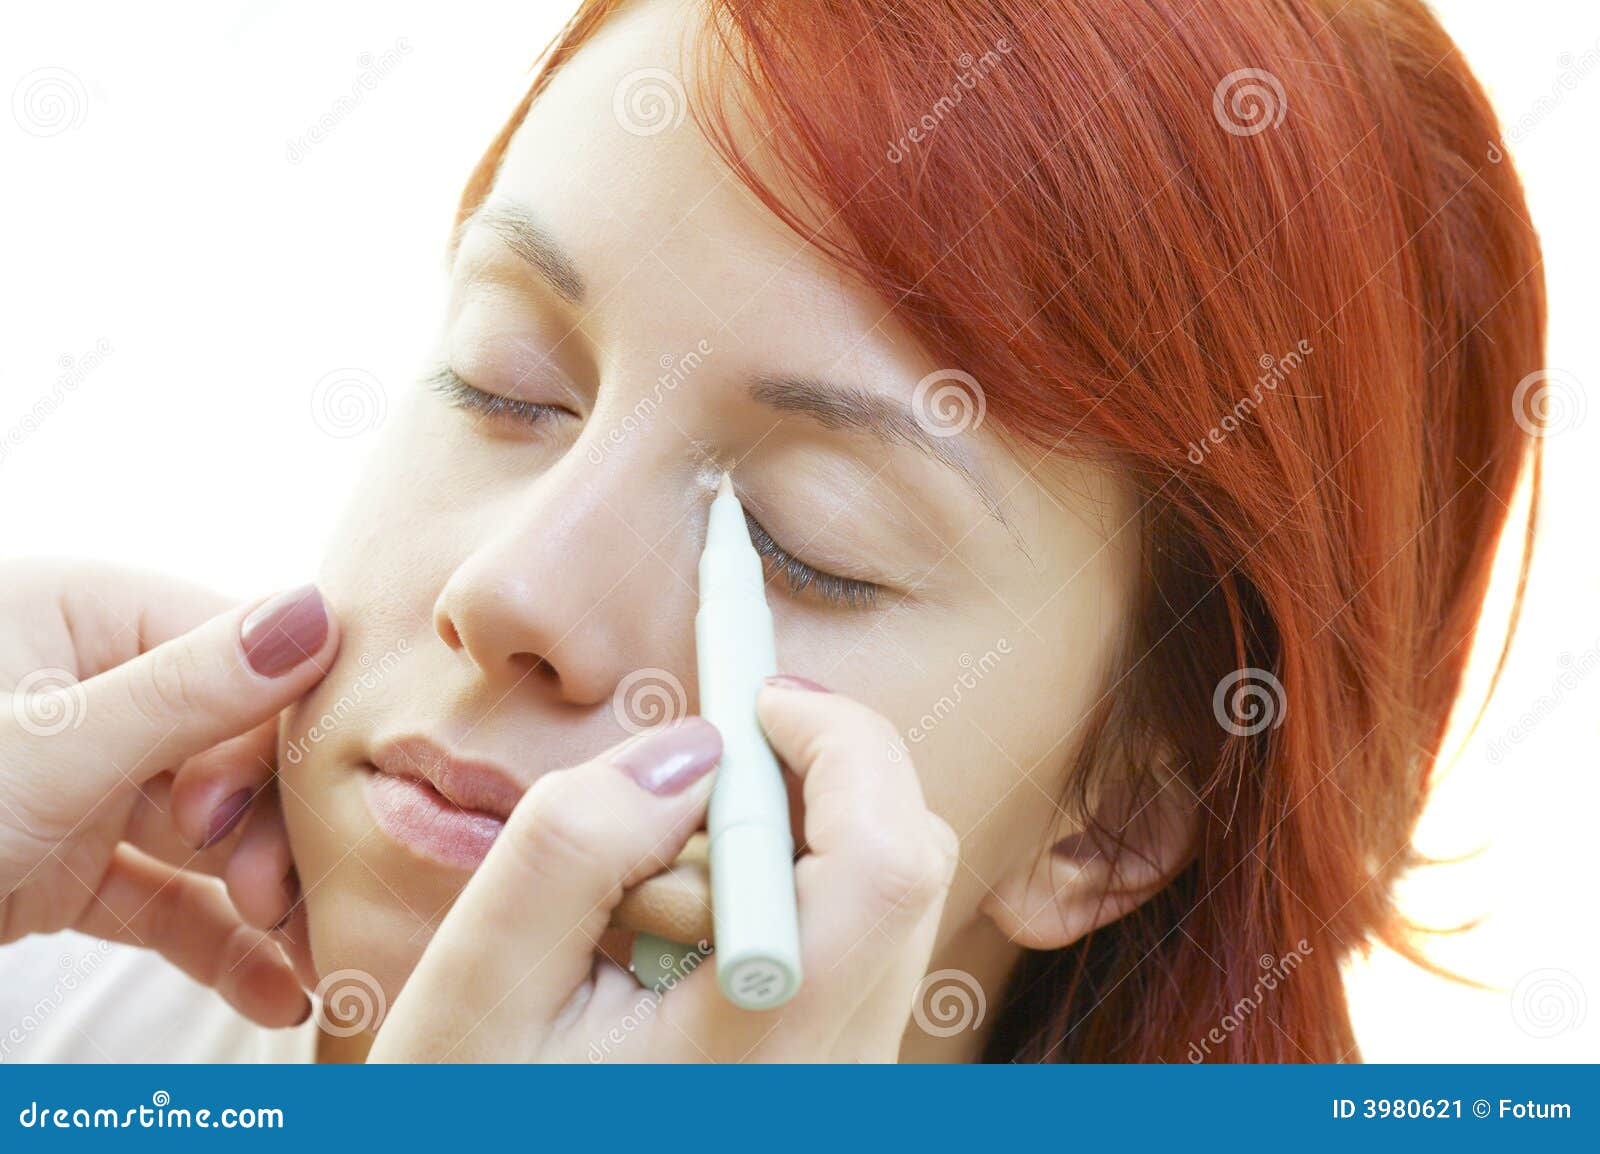 beautician is doing make-up to red-haired girl